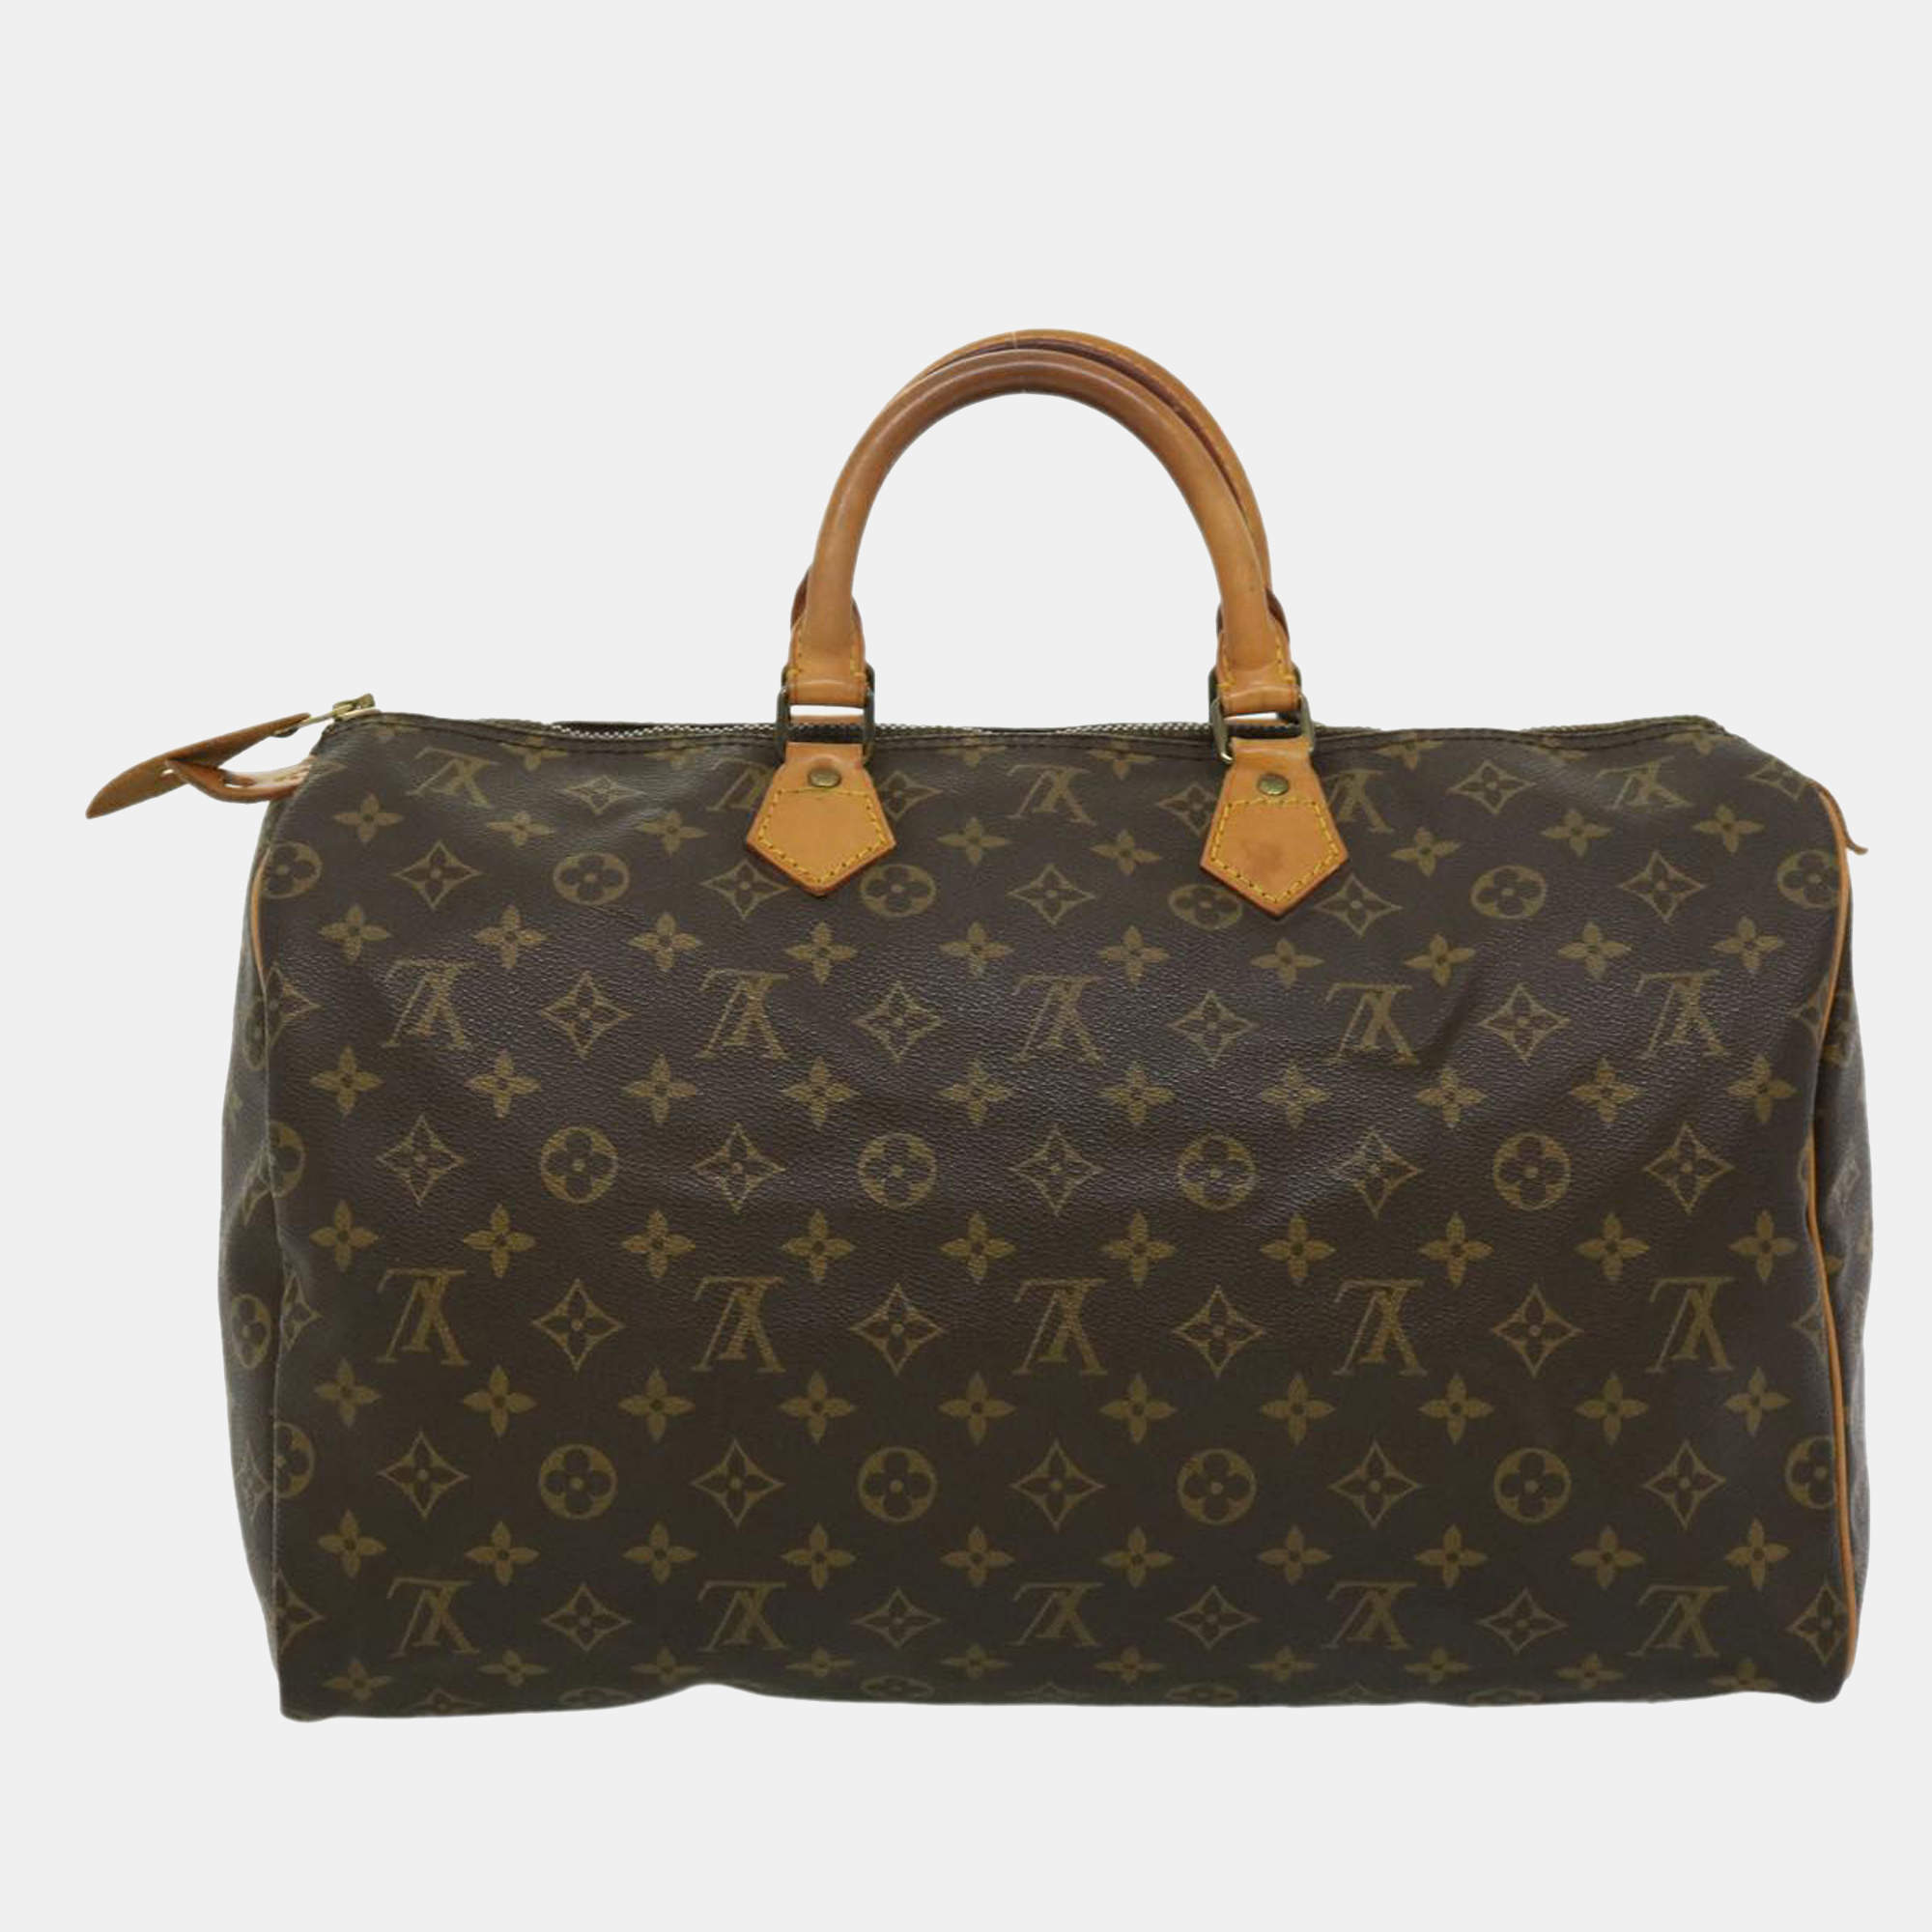 Best Louis Vuitton For Sale! Speedy 40. Comes With Dust Bag, Box